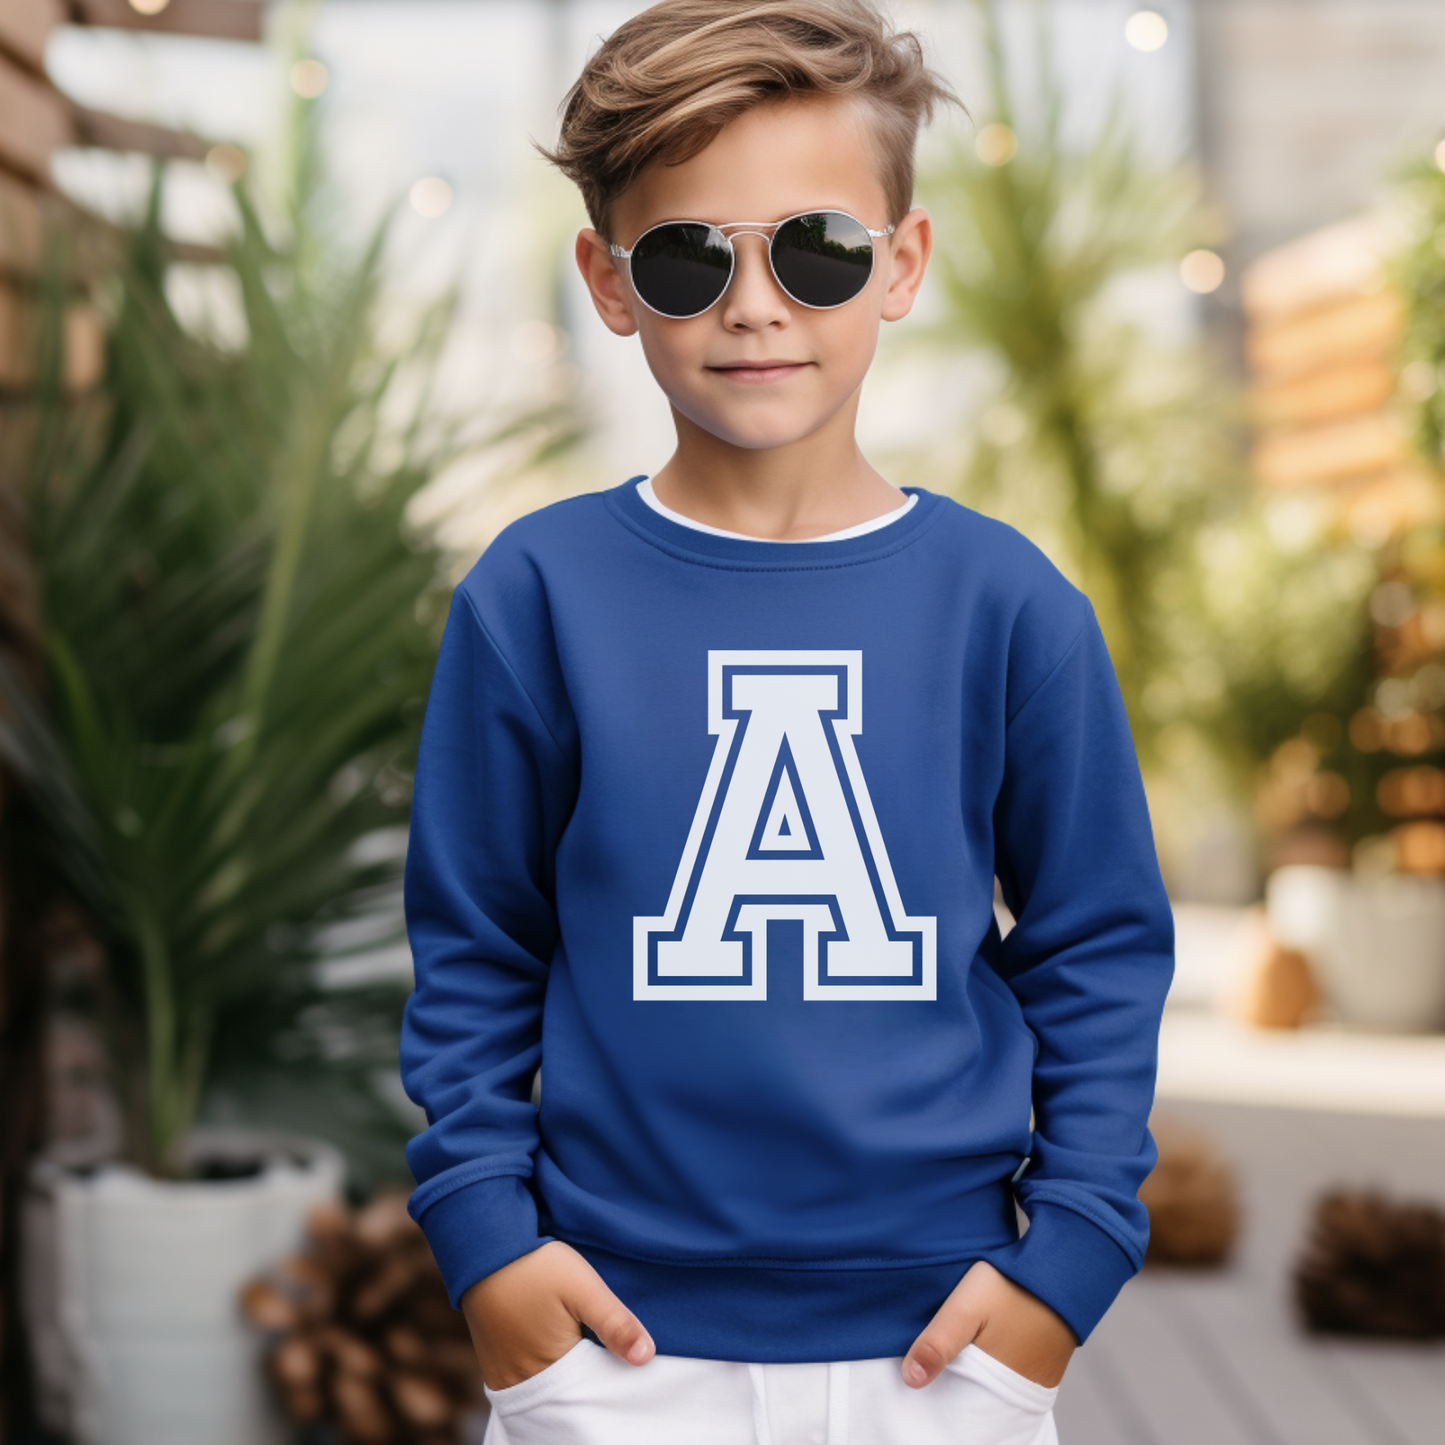 A little boy wearing a blue sweatshirt with a big white printed letter 